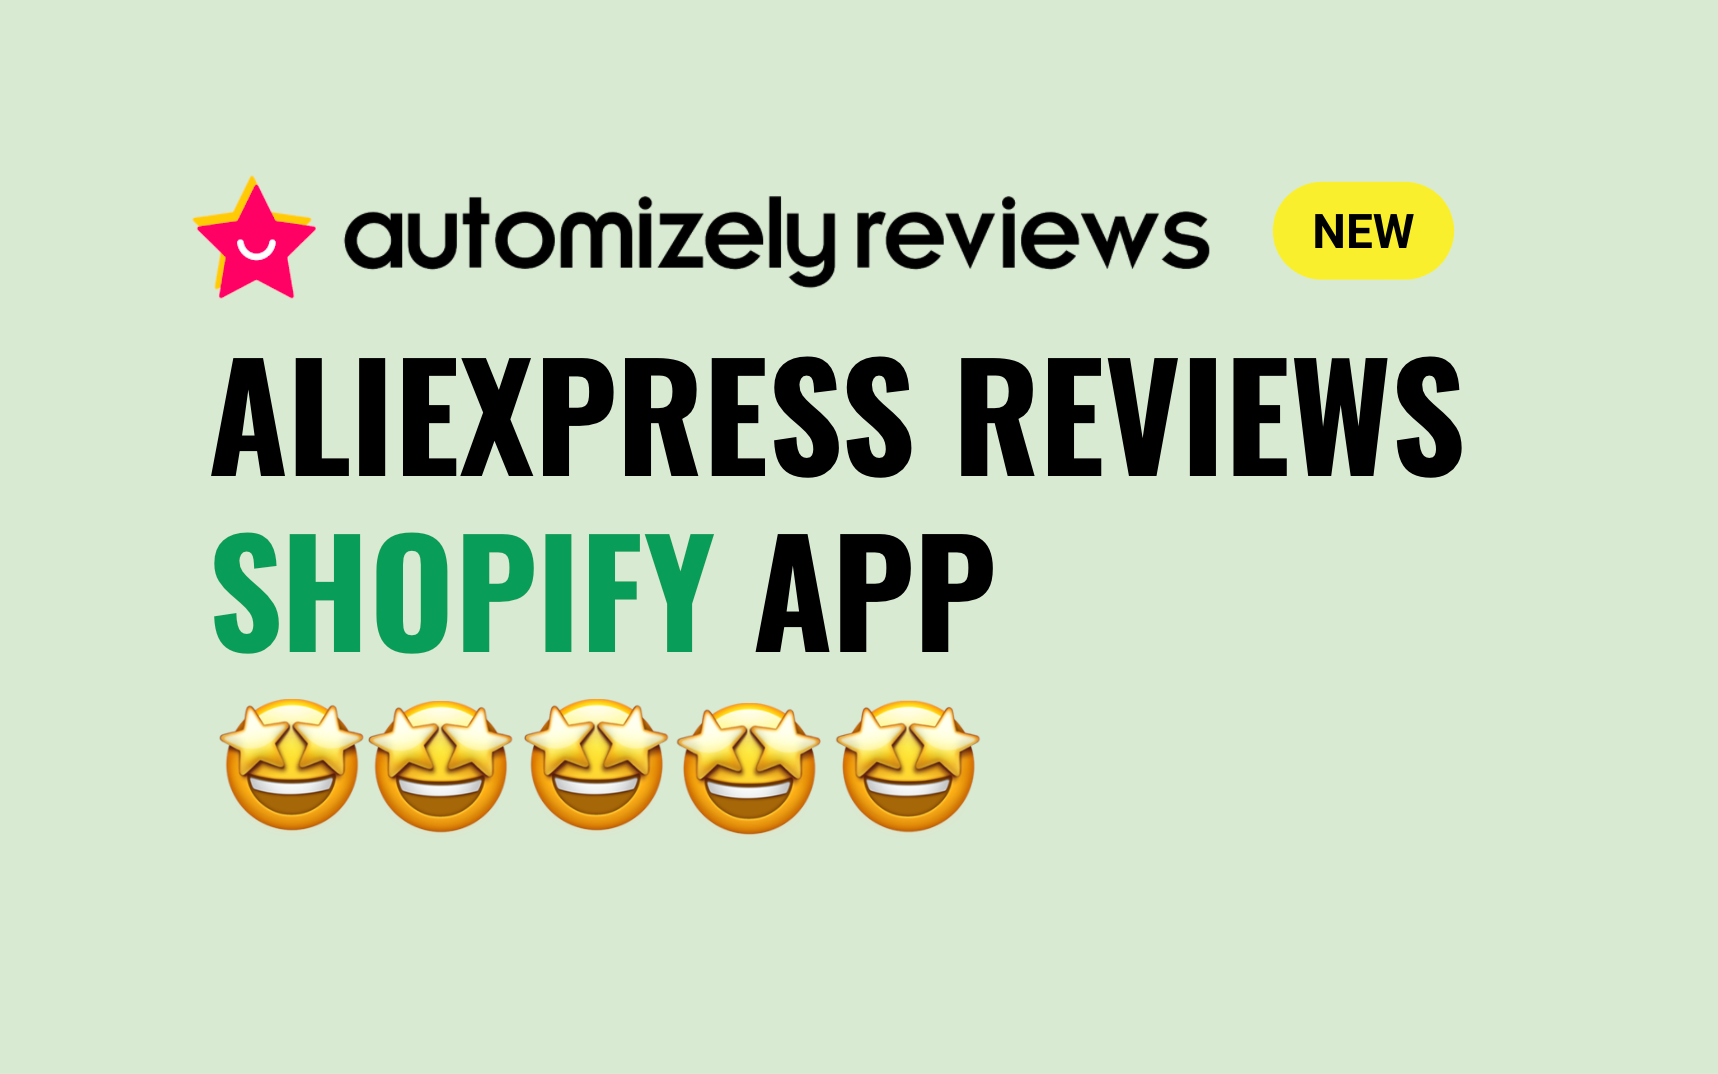 Introducing free AliExpress reviews app for Shopify